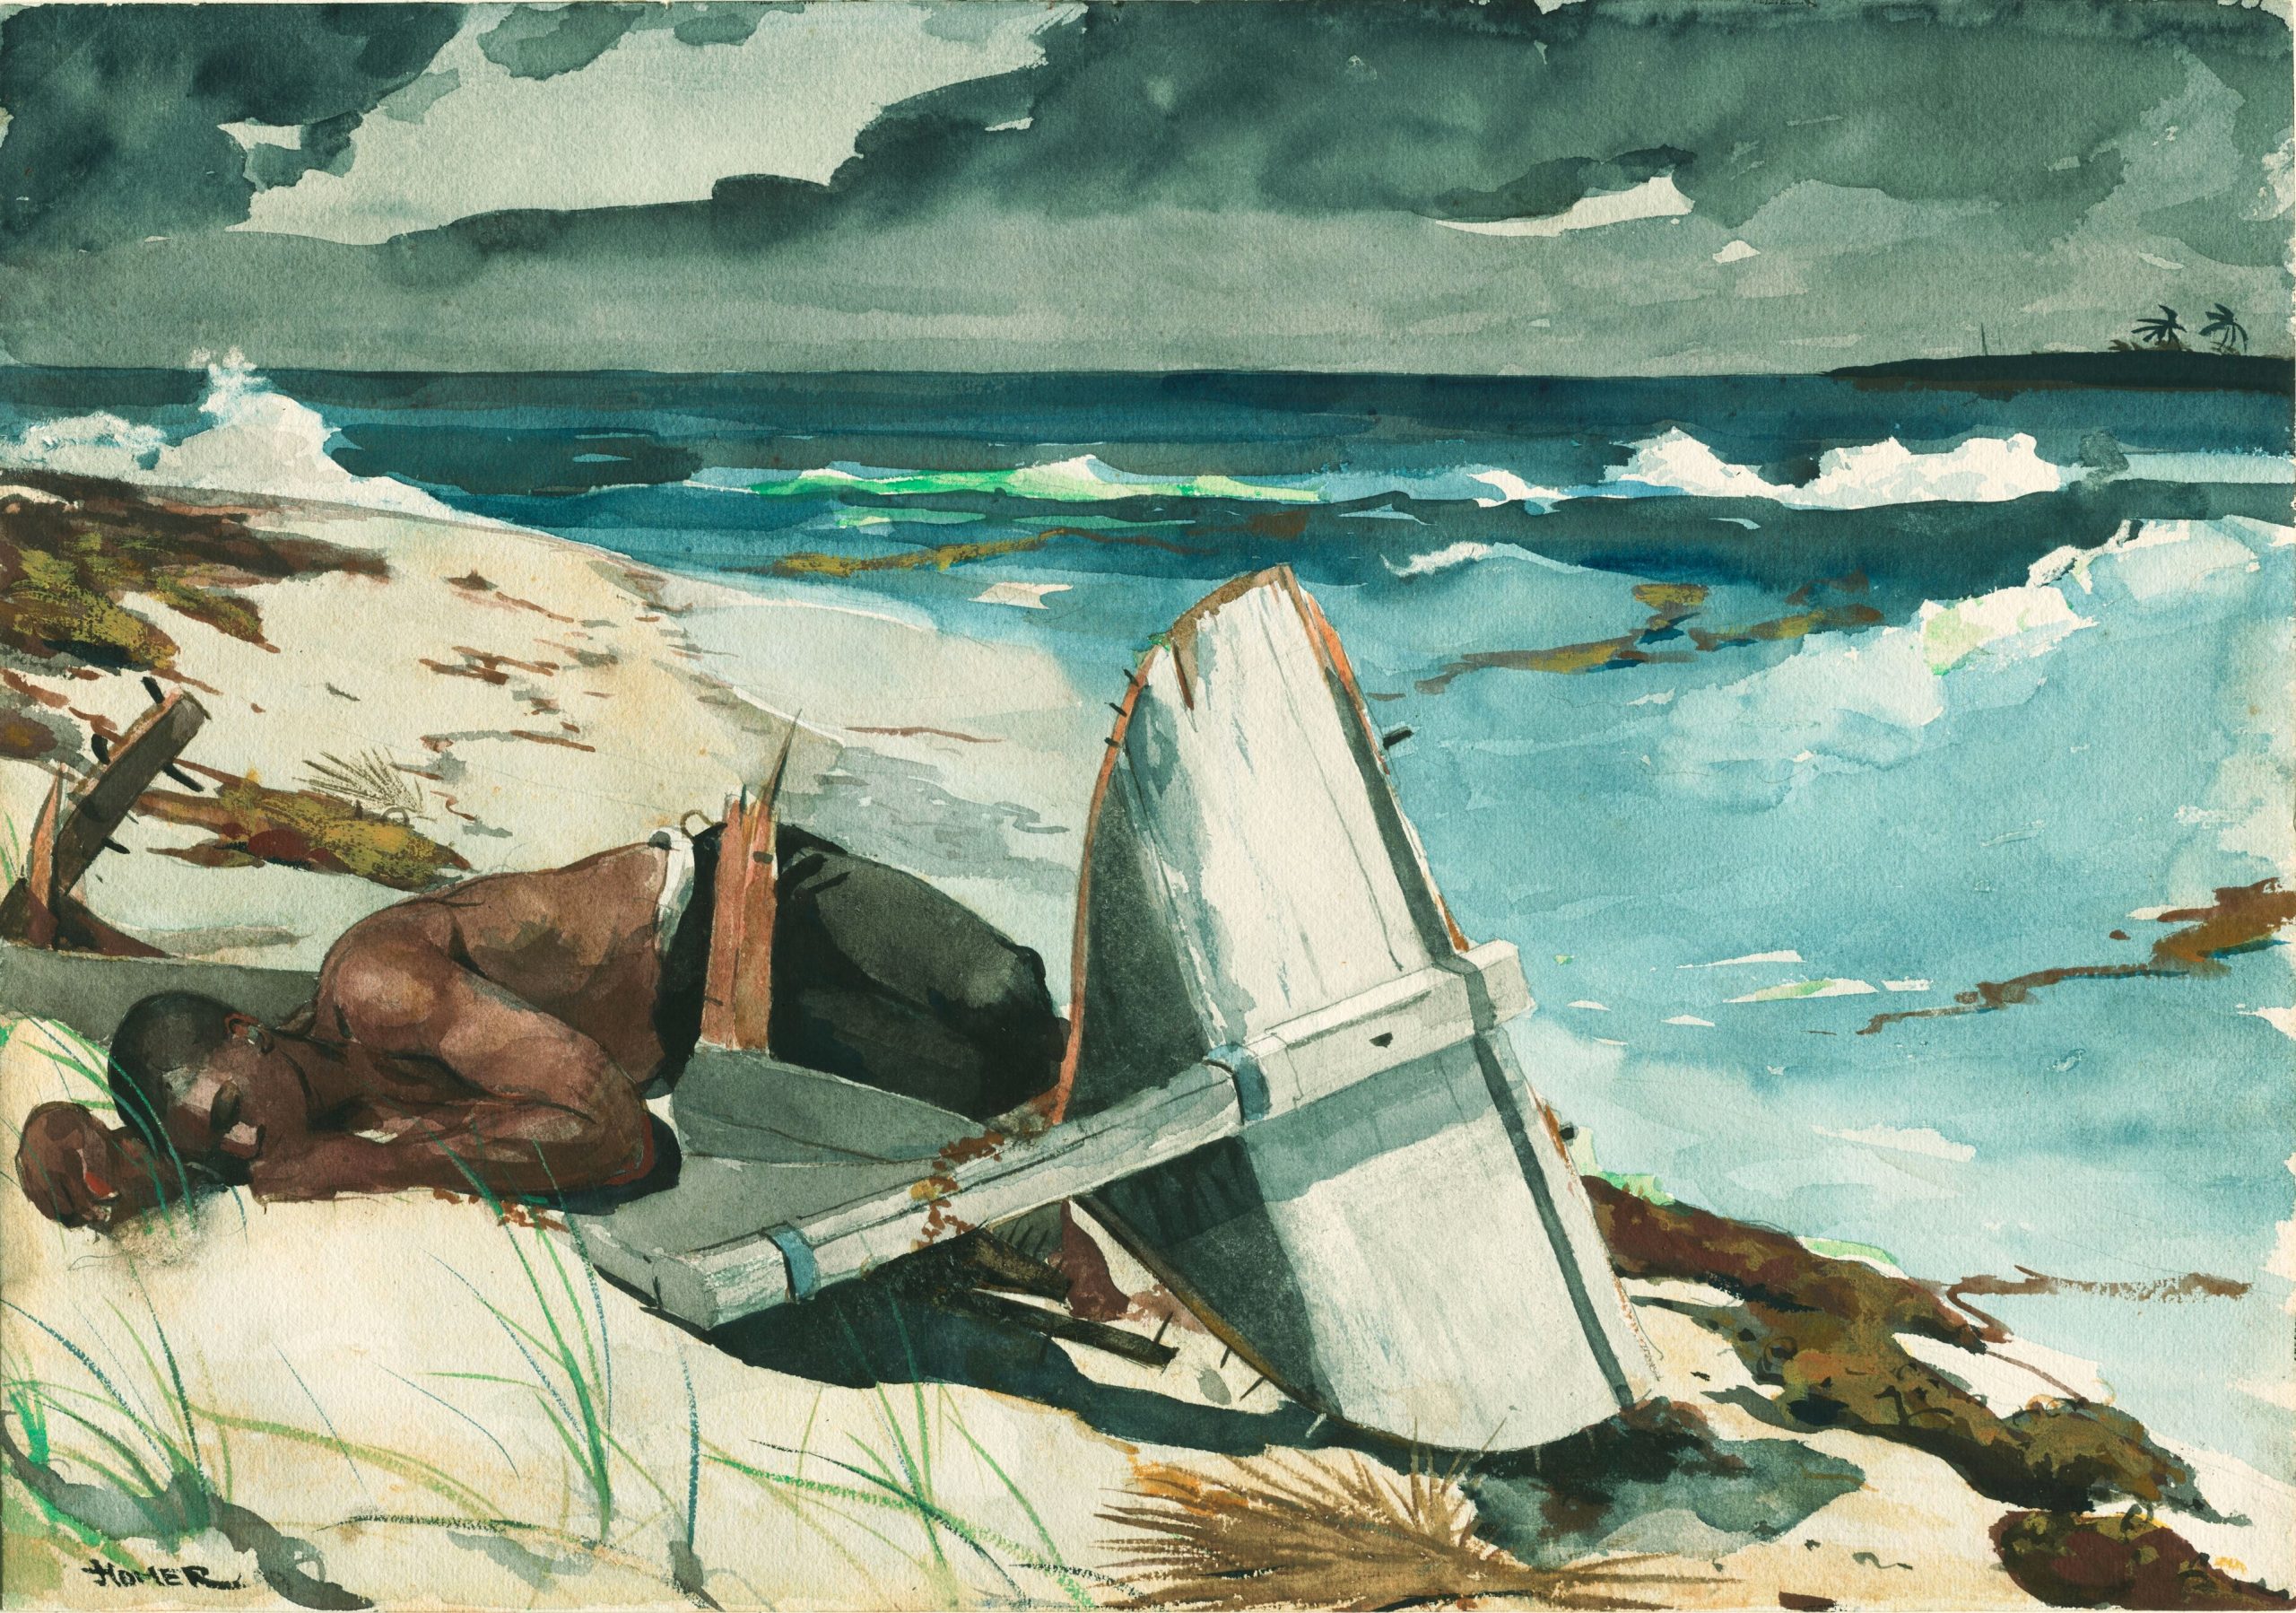 A man lying motionless on the beach beside an overturned boat